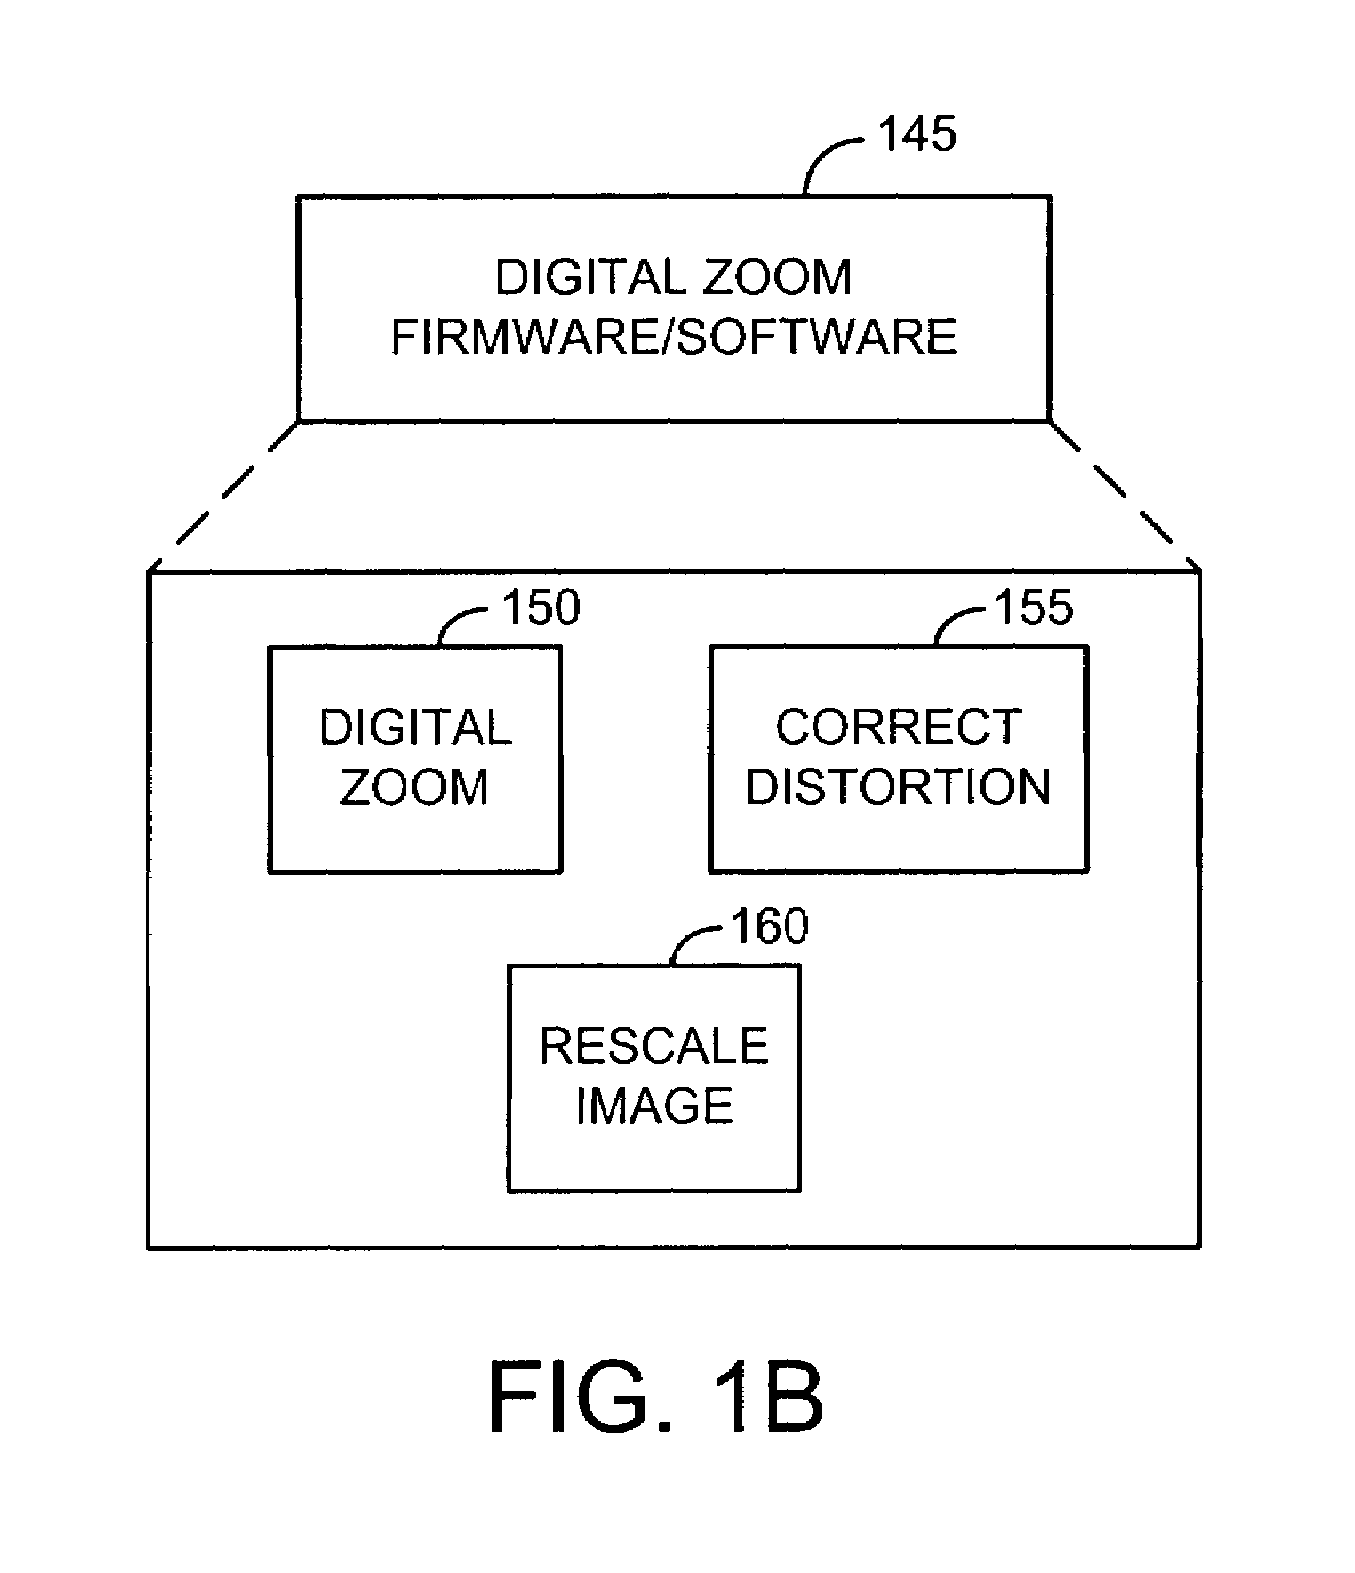 Apparatus and method for improved-resolution digital zoom in an electronic imaging device